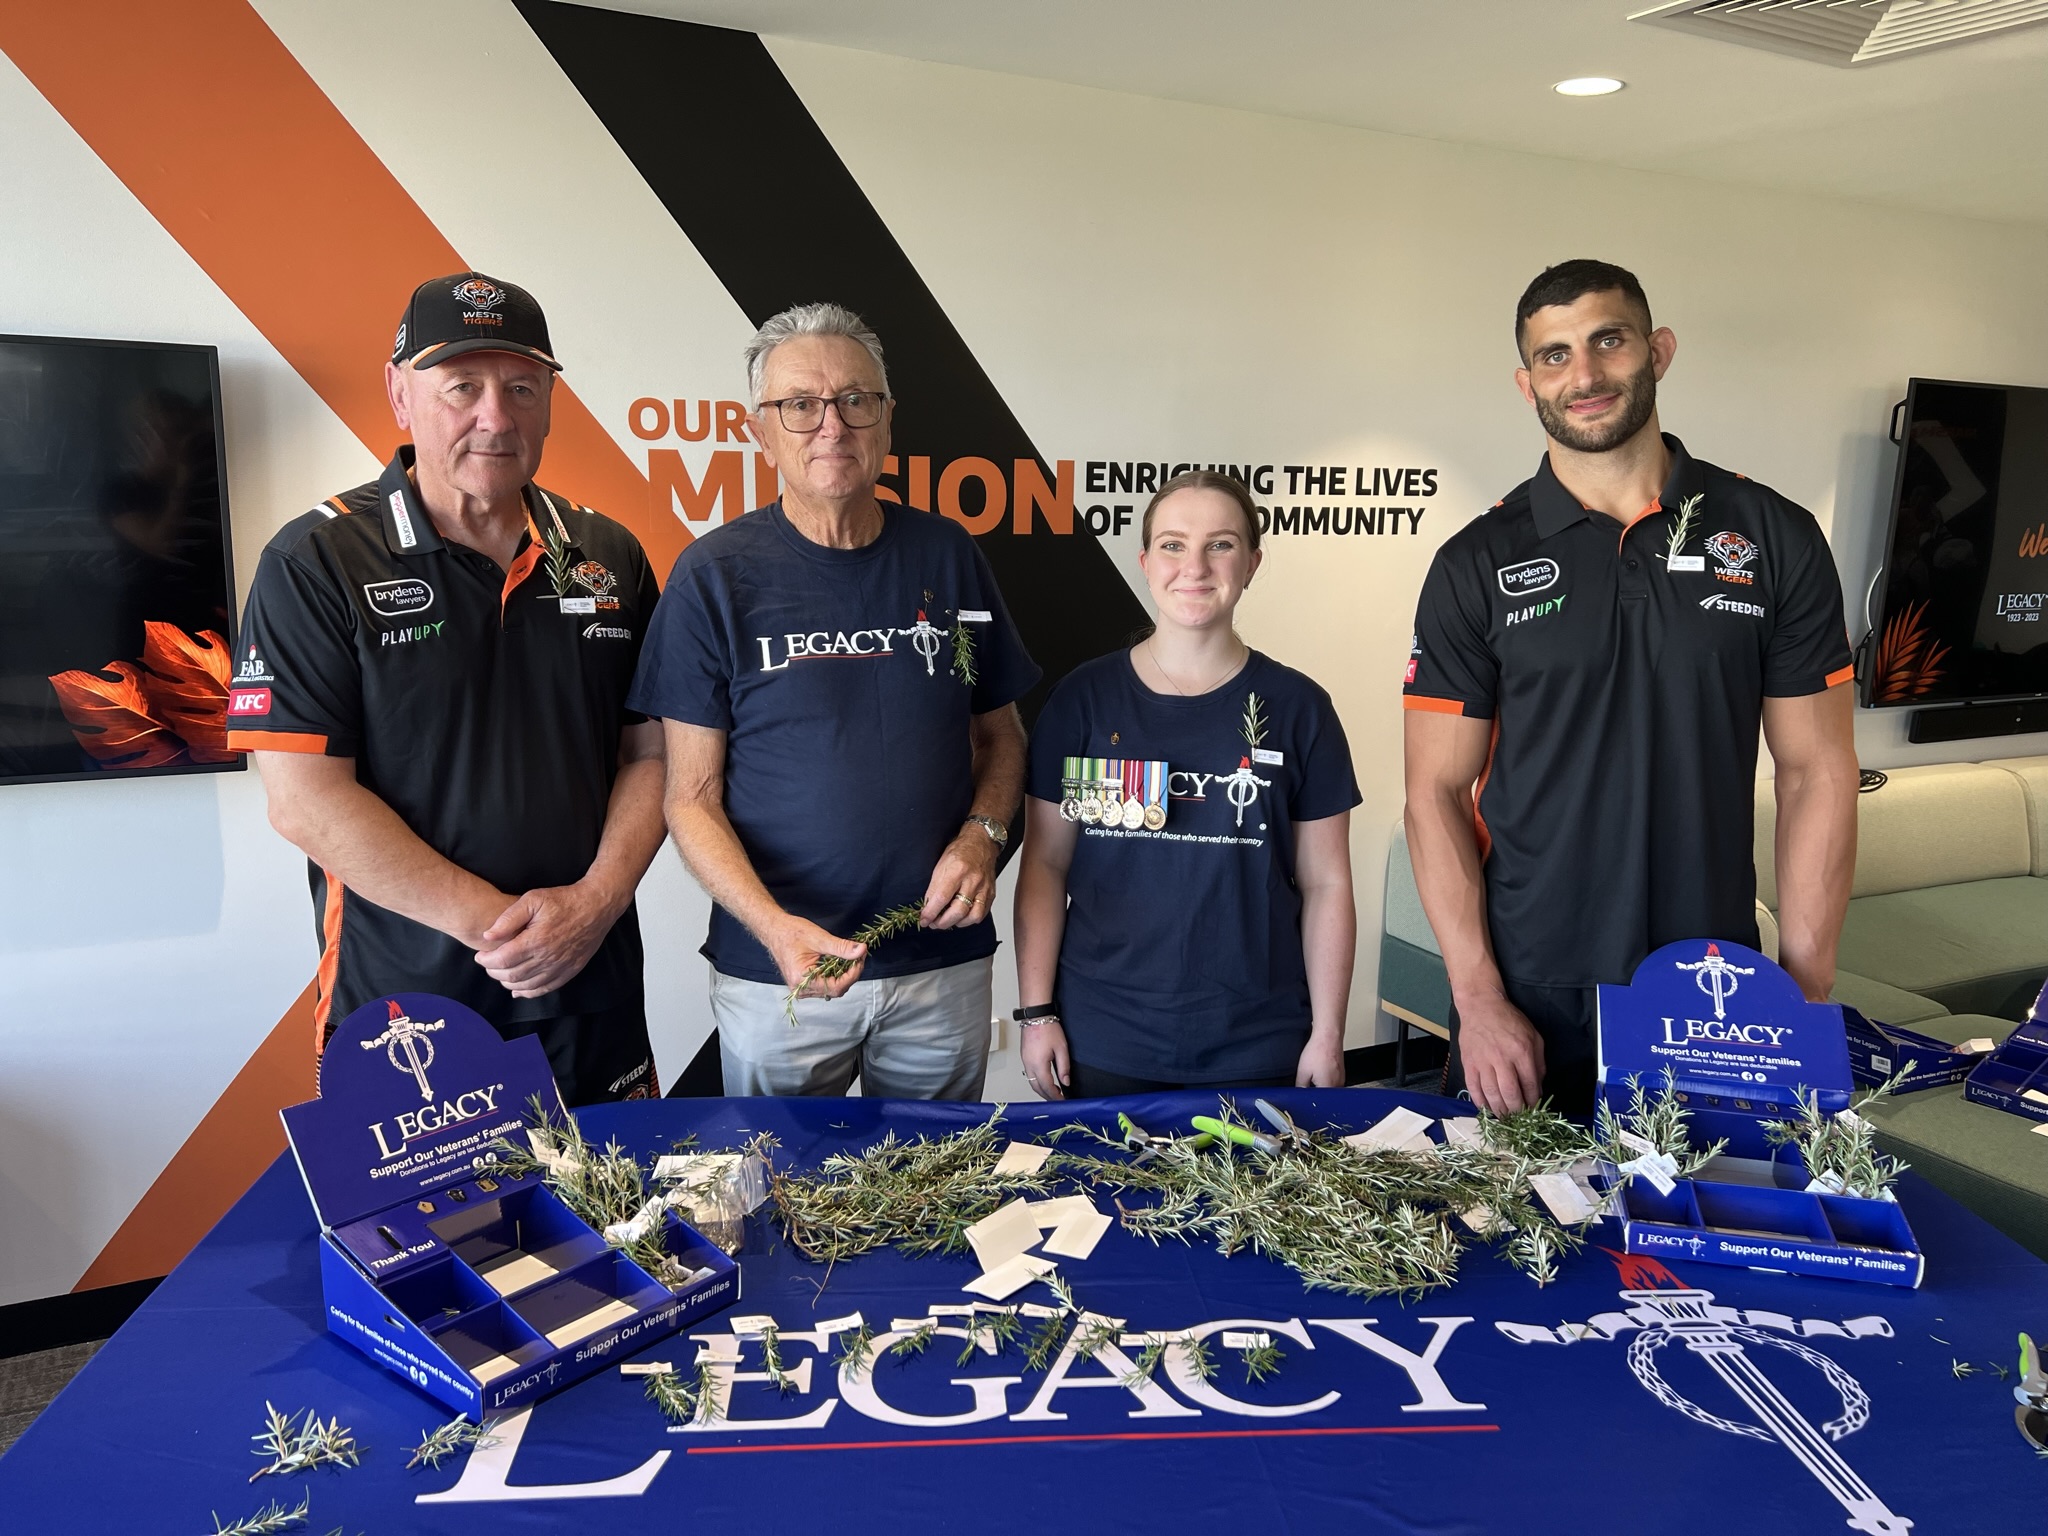 Wests Tigers Honors Legacy with Rosemary Sprigging and Commemorative Jerseys